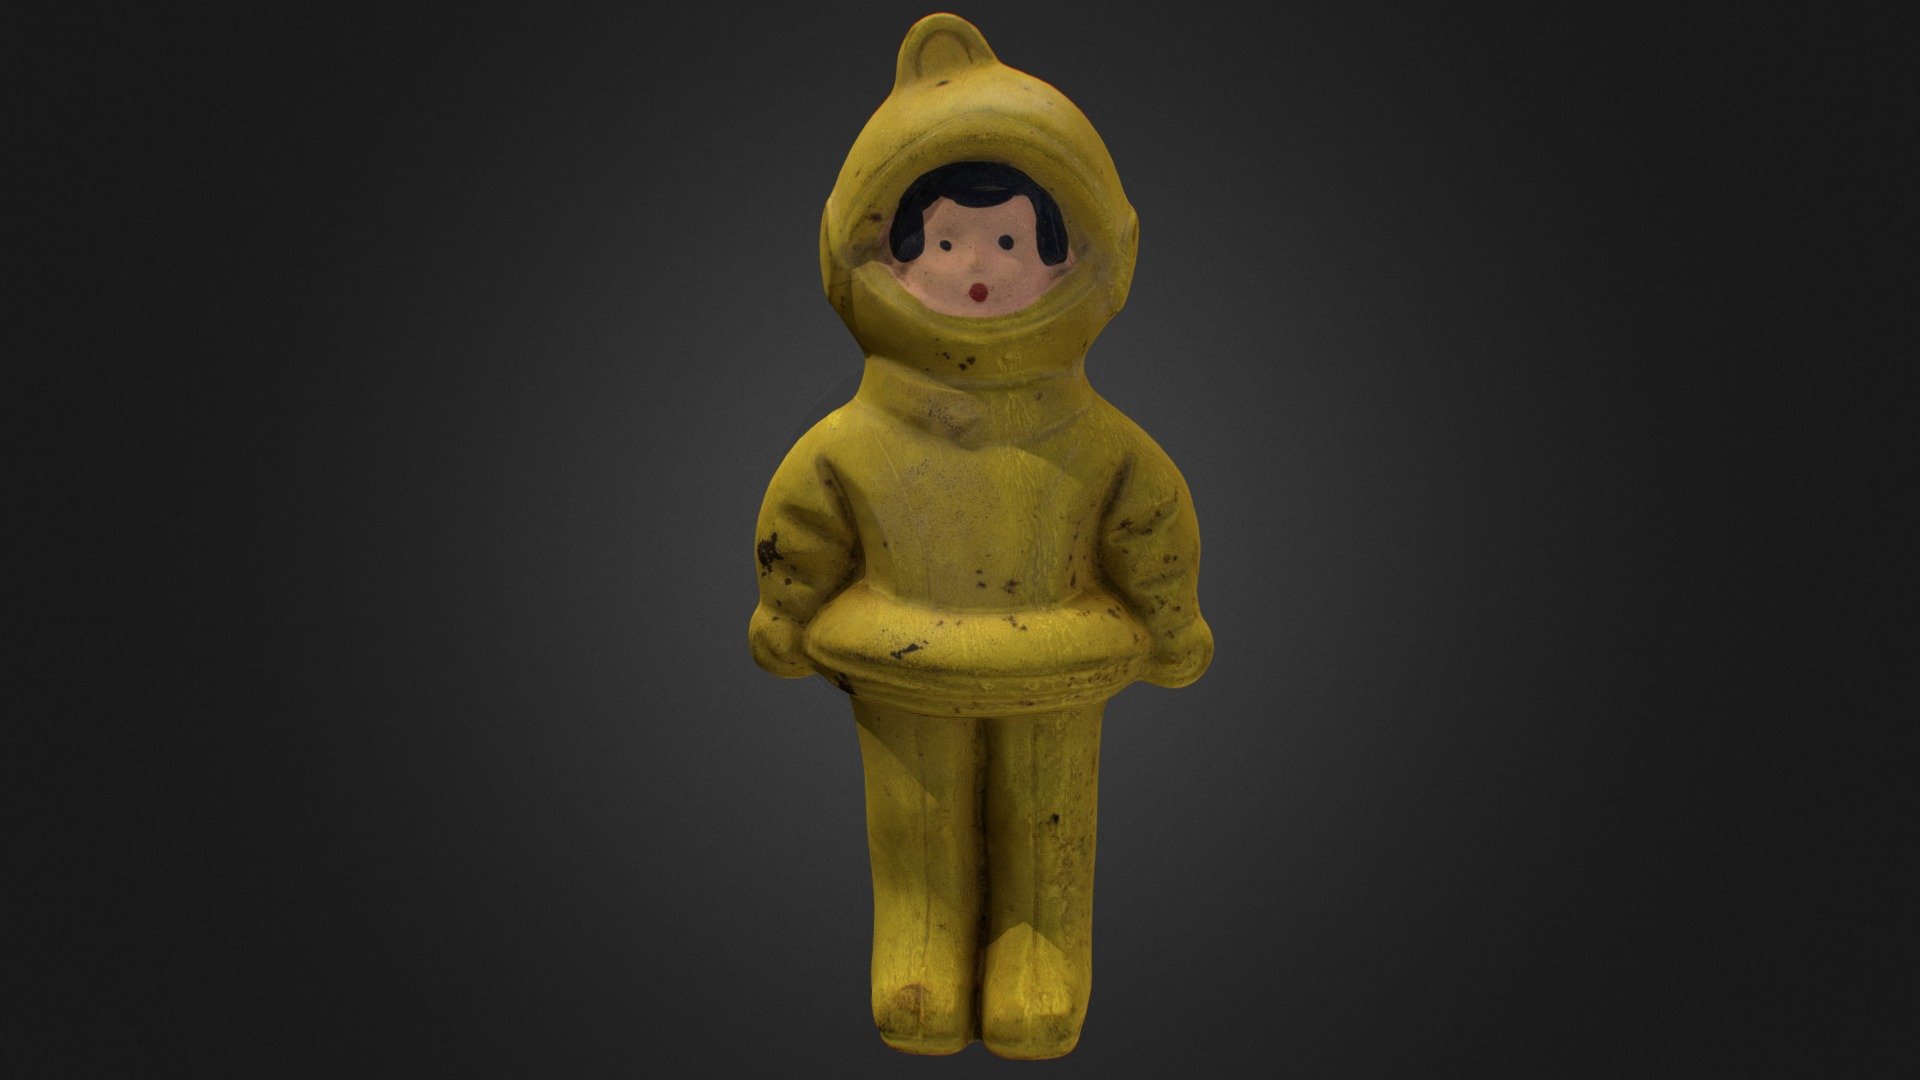 Old USSR Soviet Rubber Toy Astronaut Scan High Poly

Including OBJ formats and texture (8192x8192) JPG

Polygons: 101000 Vertices: 50502 - Old USSR Soviet Rubber Toy Astronaut - 3D model by Skeptic (@texturus) 3d model